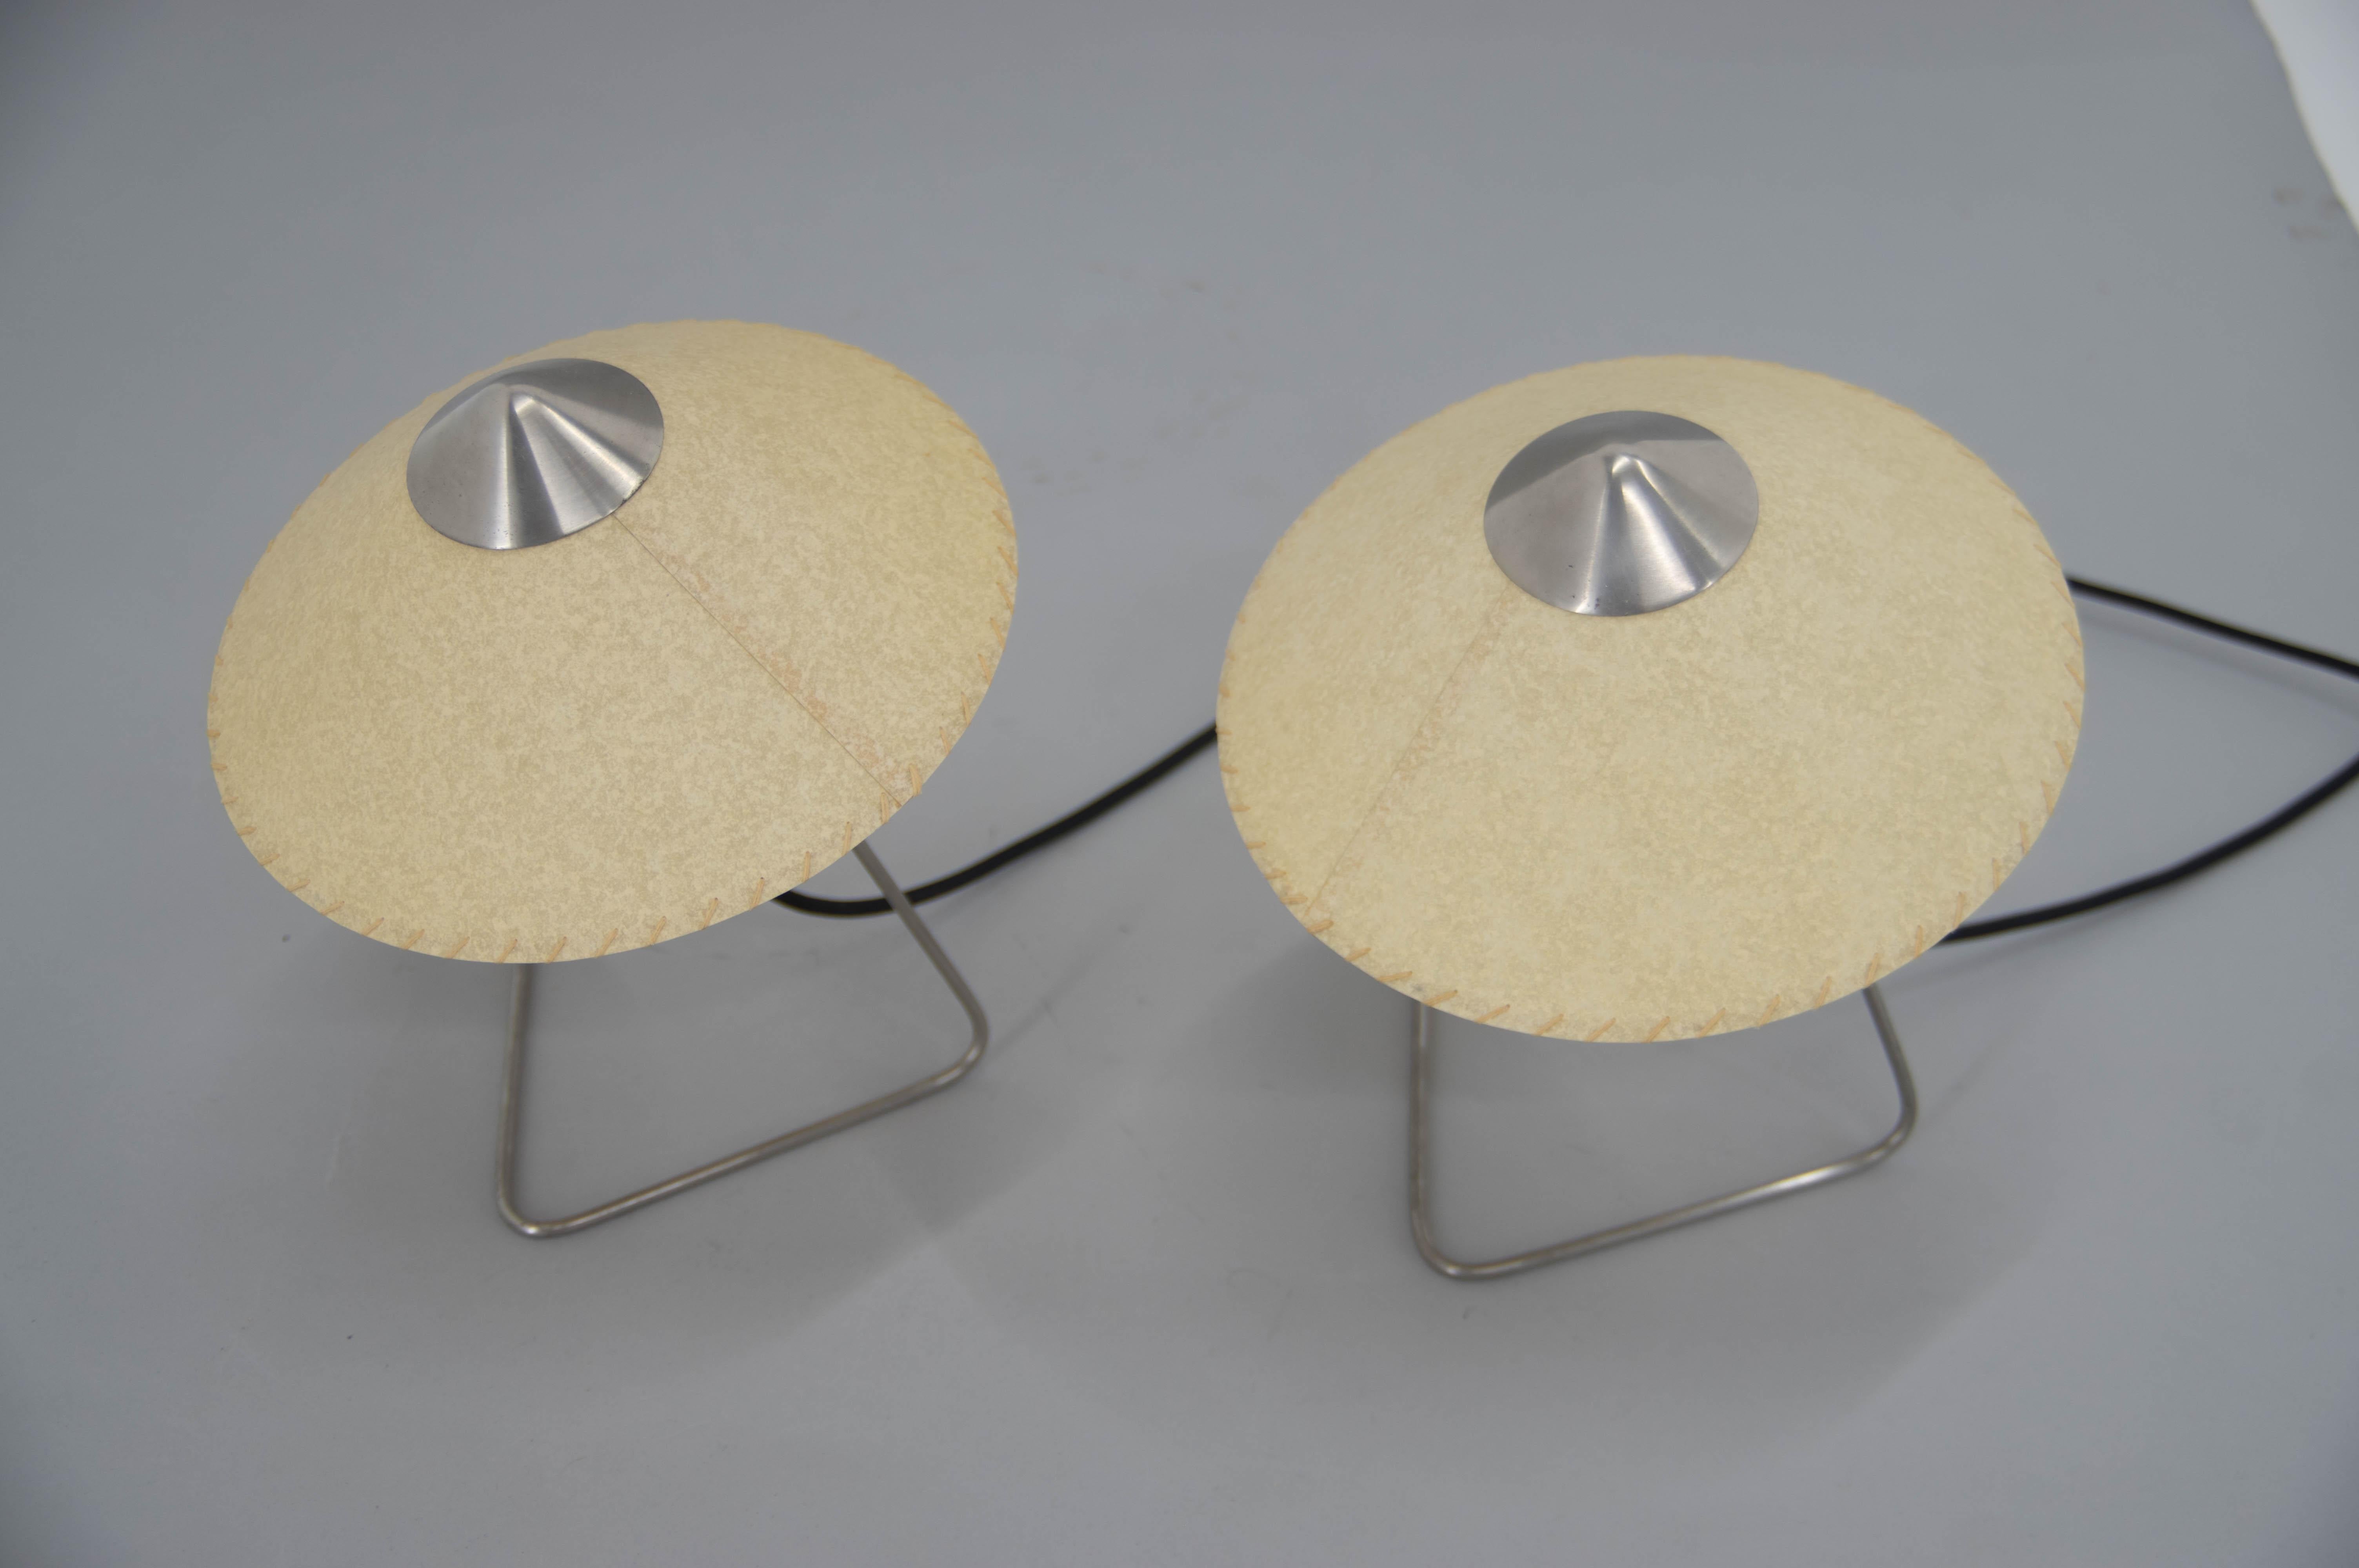 Mid-20th Century Set of Two Table or Wall Lamps by Frantova for OKOLO, Czechoslovakia, 1950s